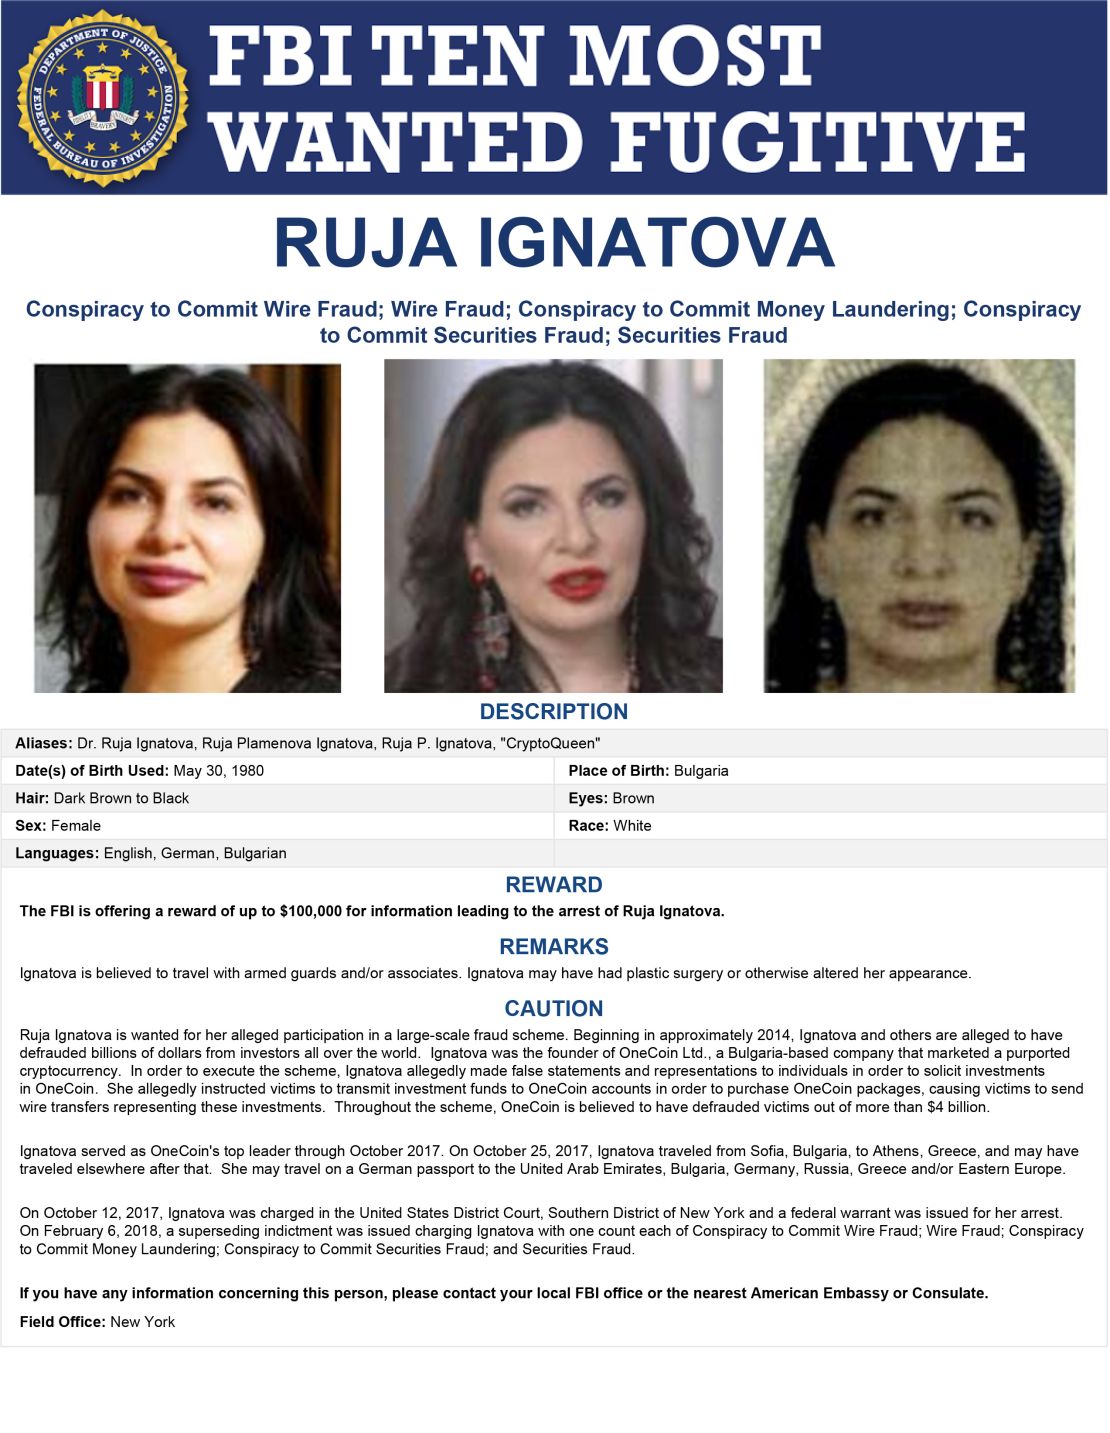 Ruja Ignatova is one of the FBI's 10 most-wanted fugitives -- the only woman currently on that list.